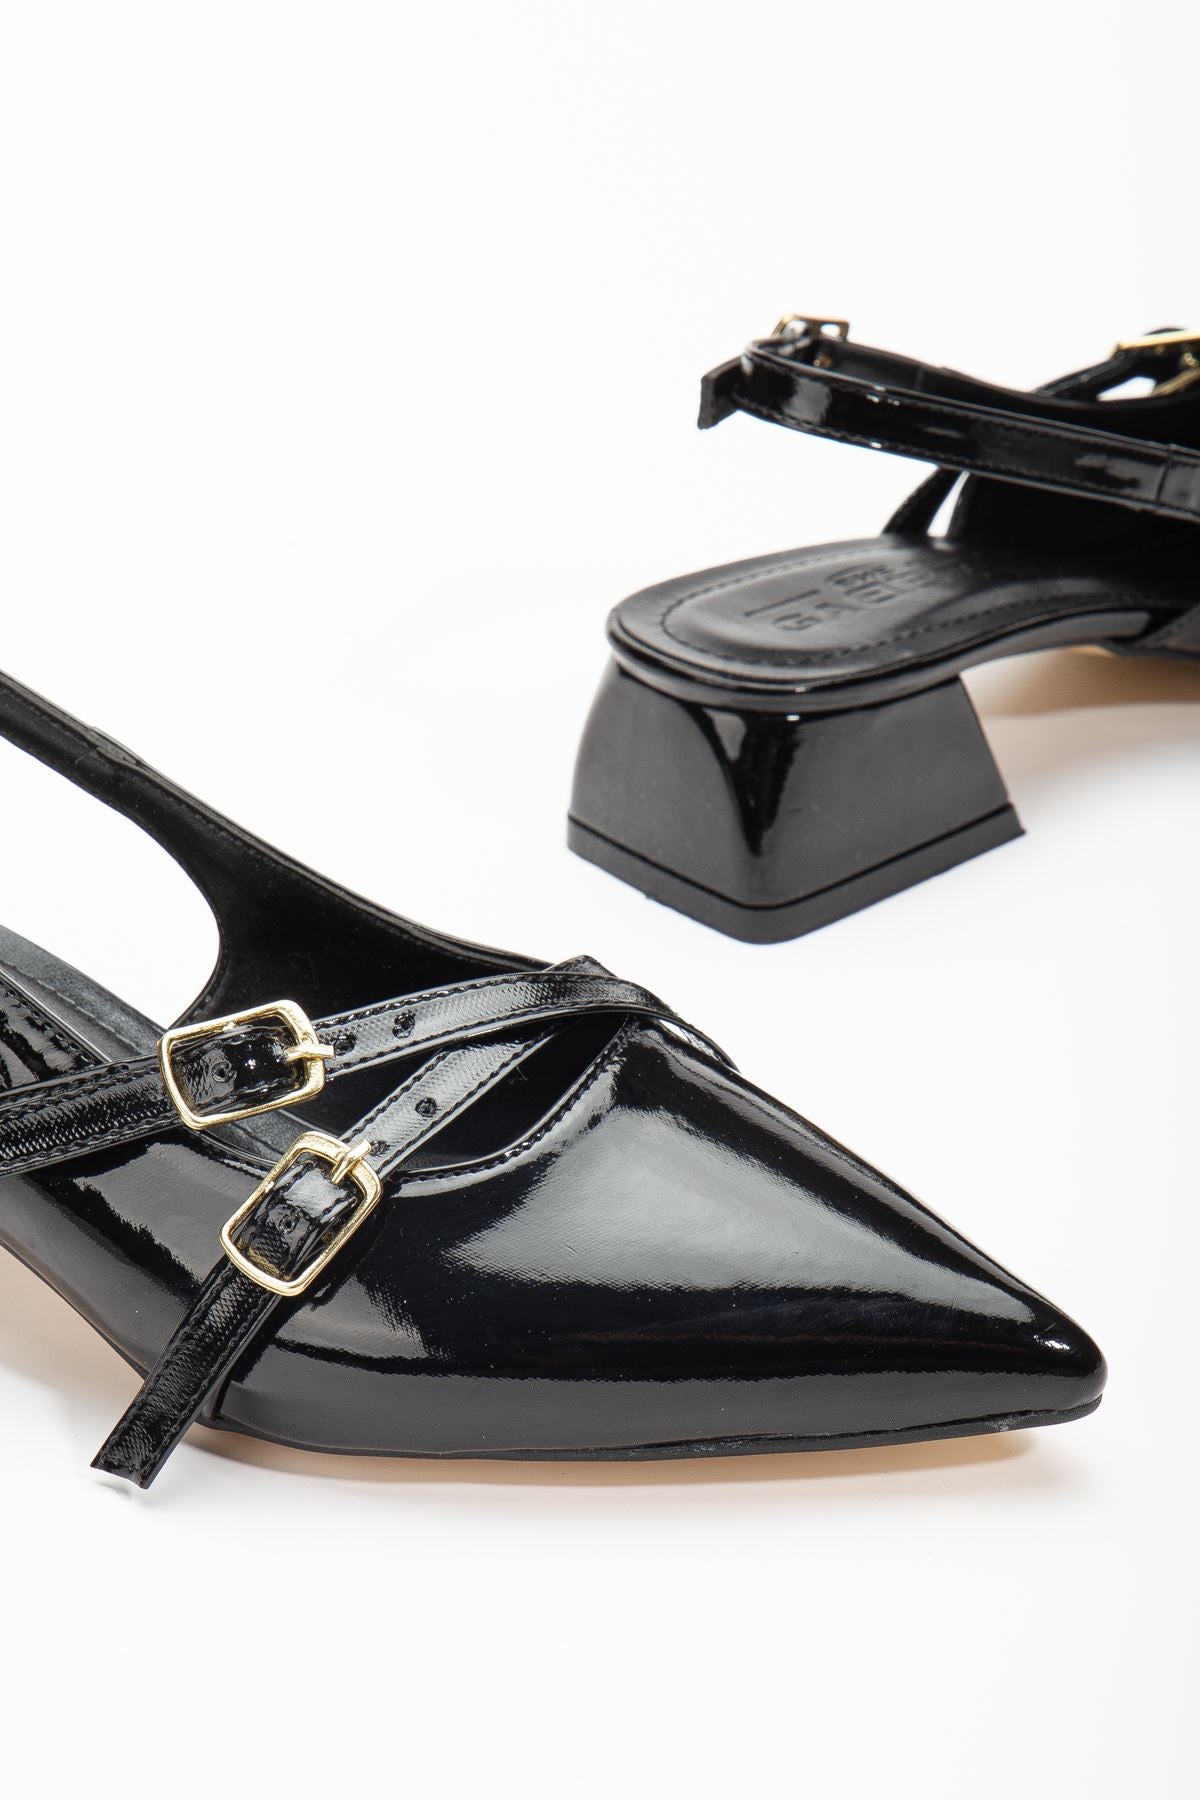 Pary Black Patent Leather Women's Heeled Shoes - STREETMODE™